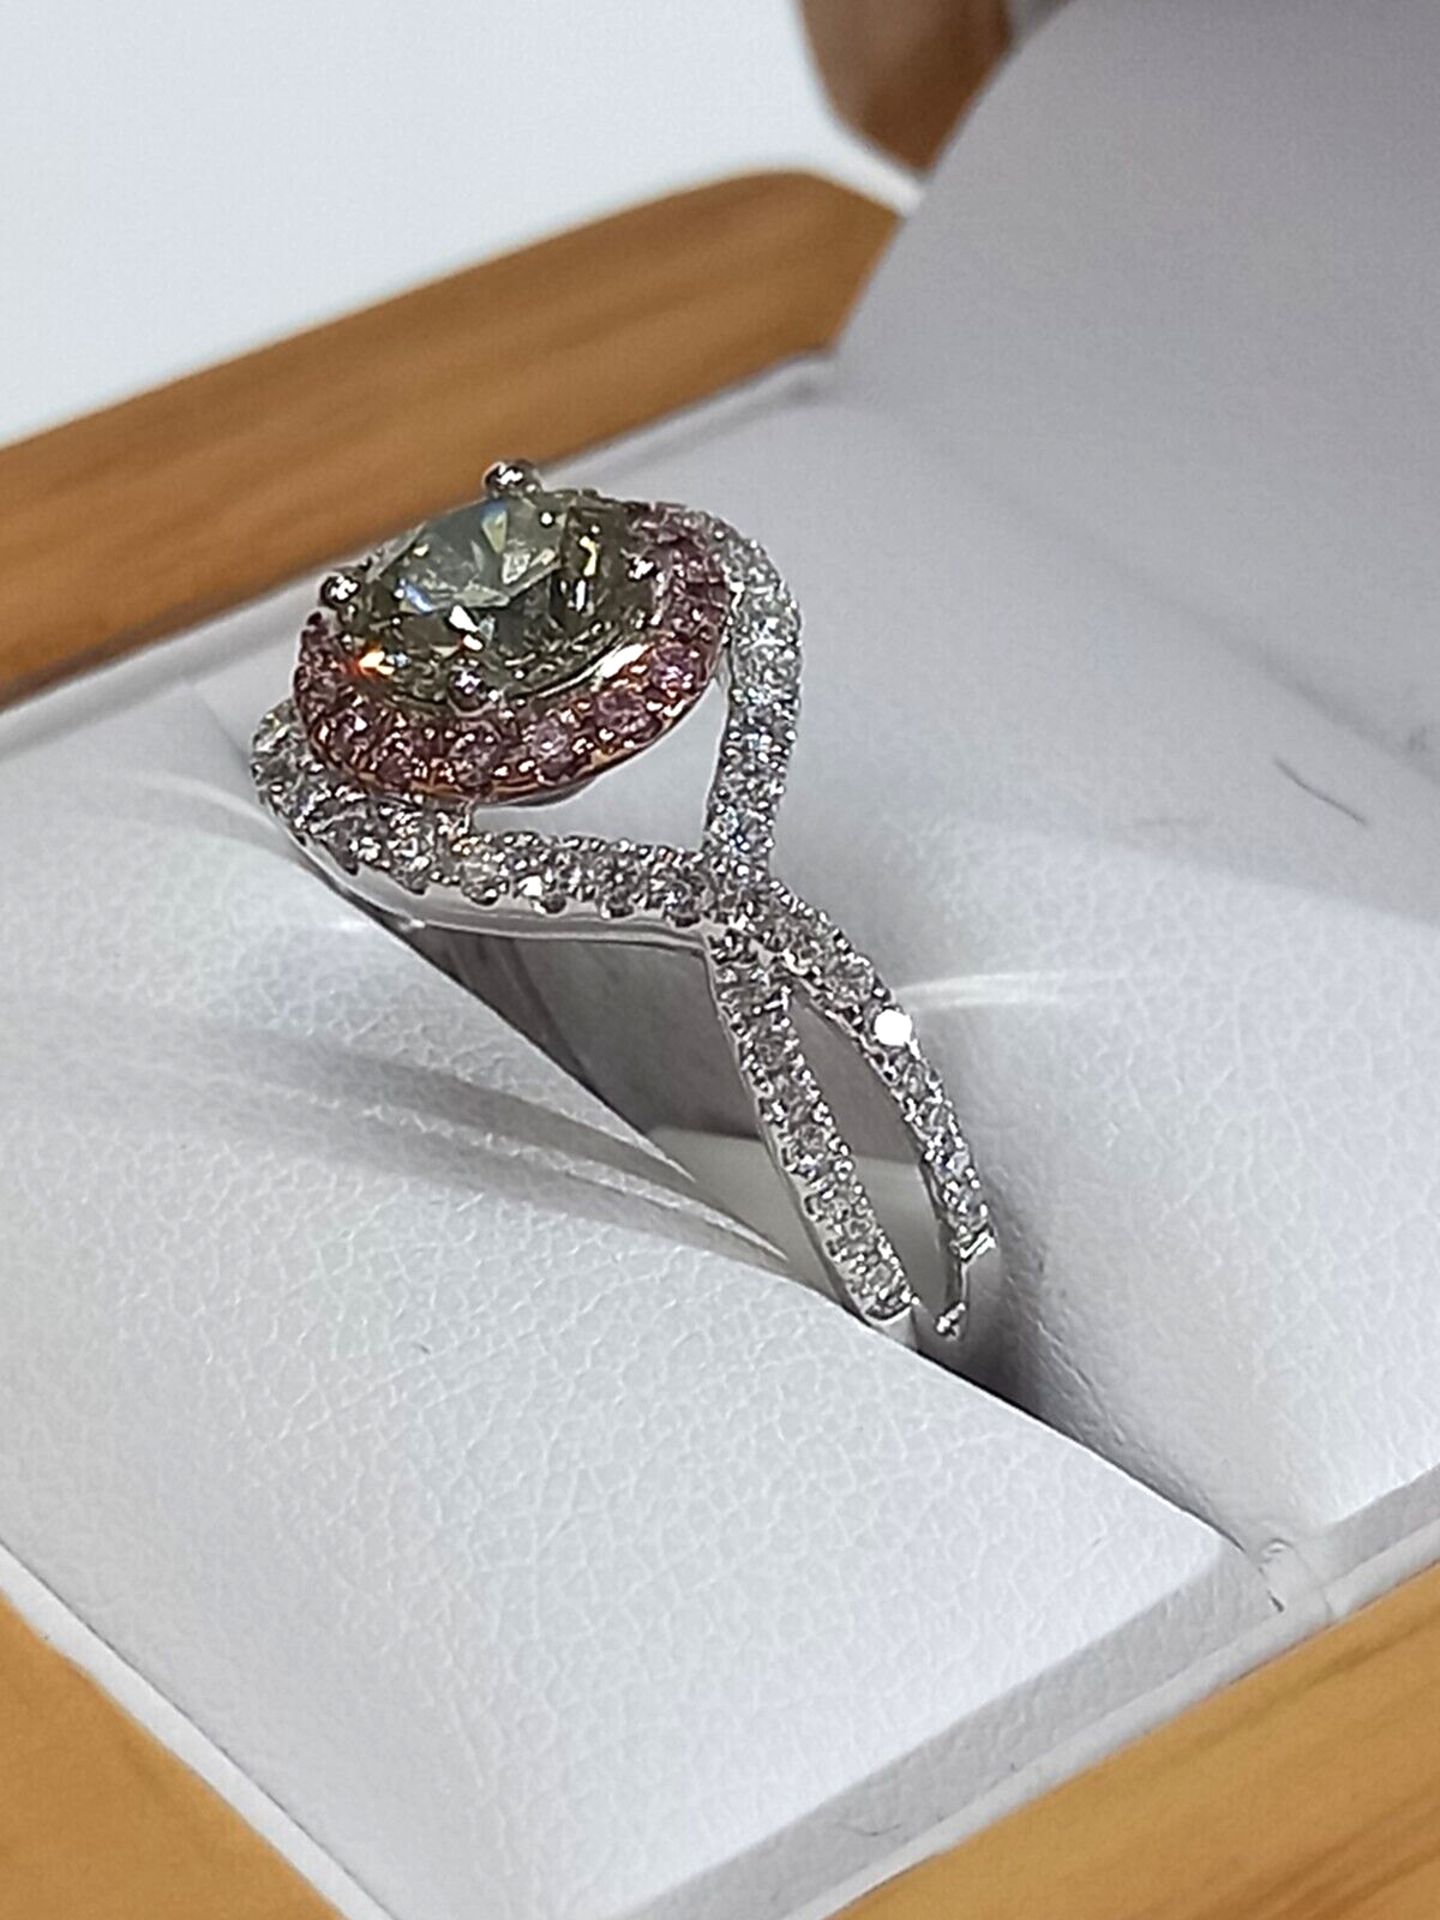 EXQUSITE 1.36CT GREEN/PINK/WHITE DIAMOND HALLO SET ENGAGEMENT RING + VALUATION CERT OF £12995 - Image 5 of 9